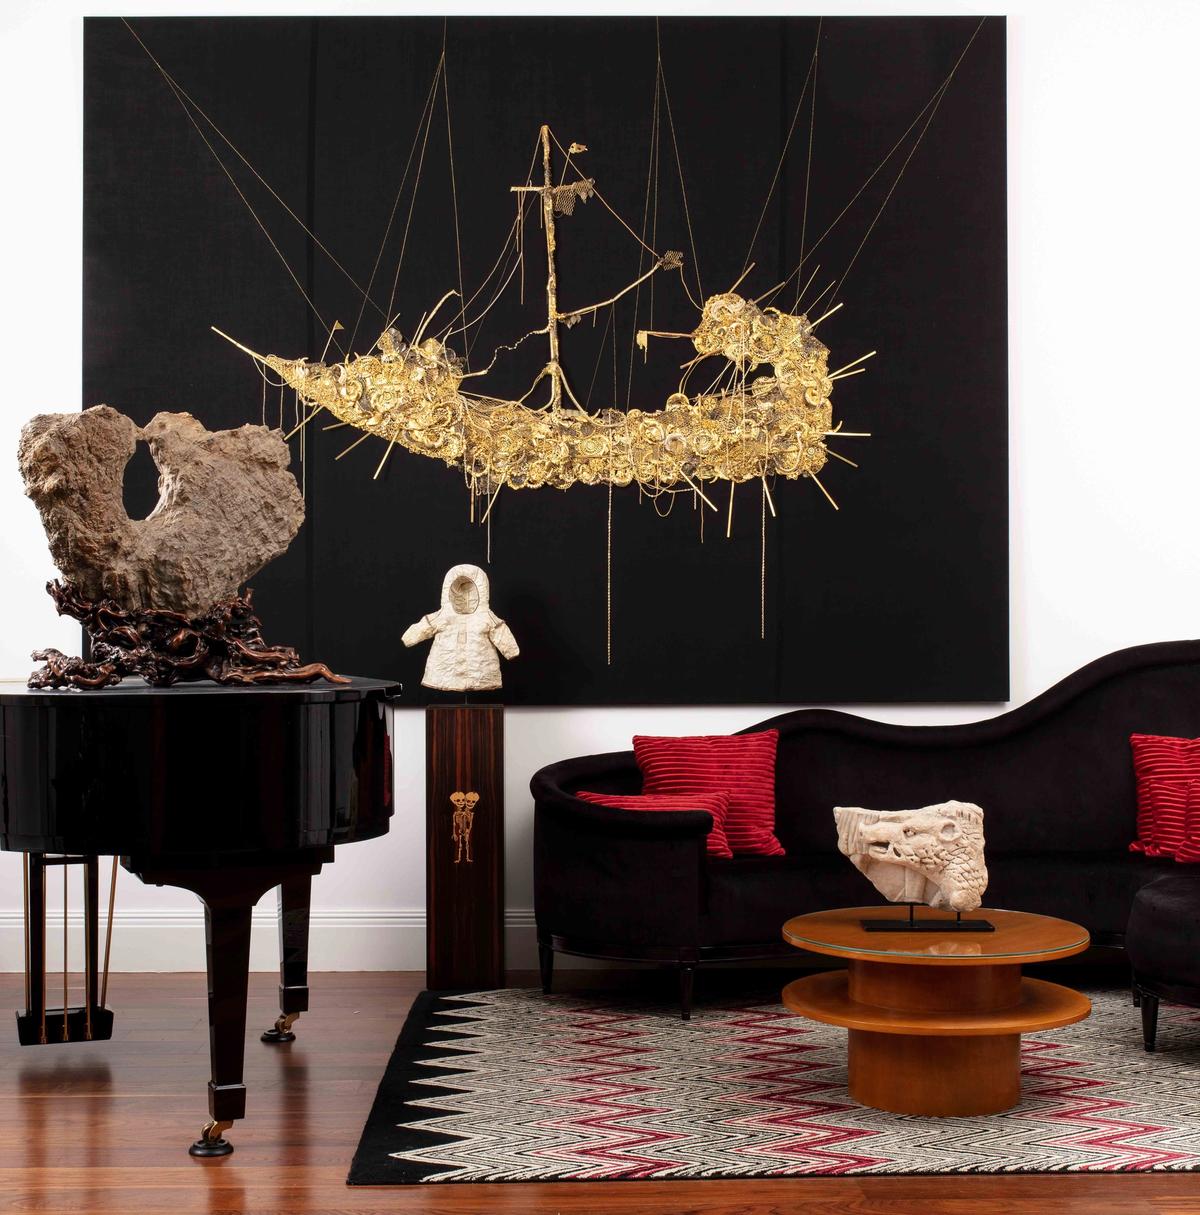 A work by Hew Locke alongside other items from the Peter Petrou sale Courtesy of Sotheby's